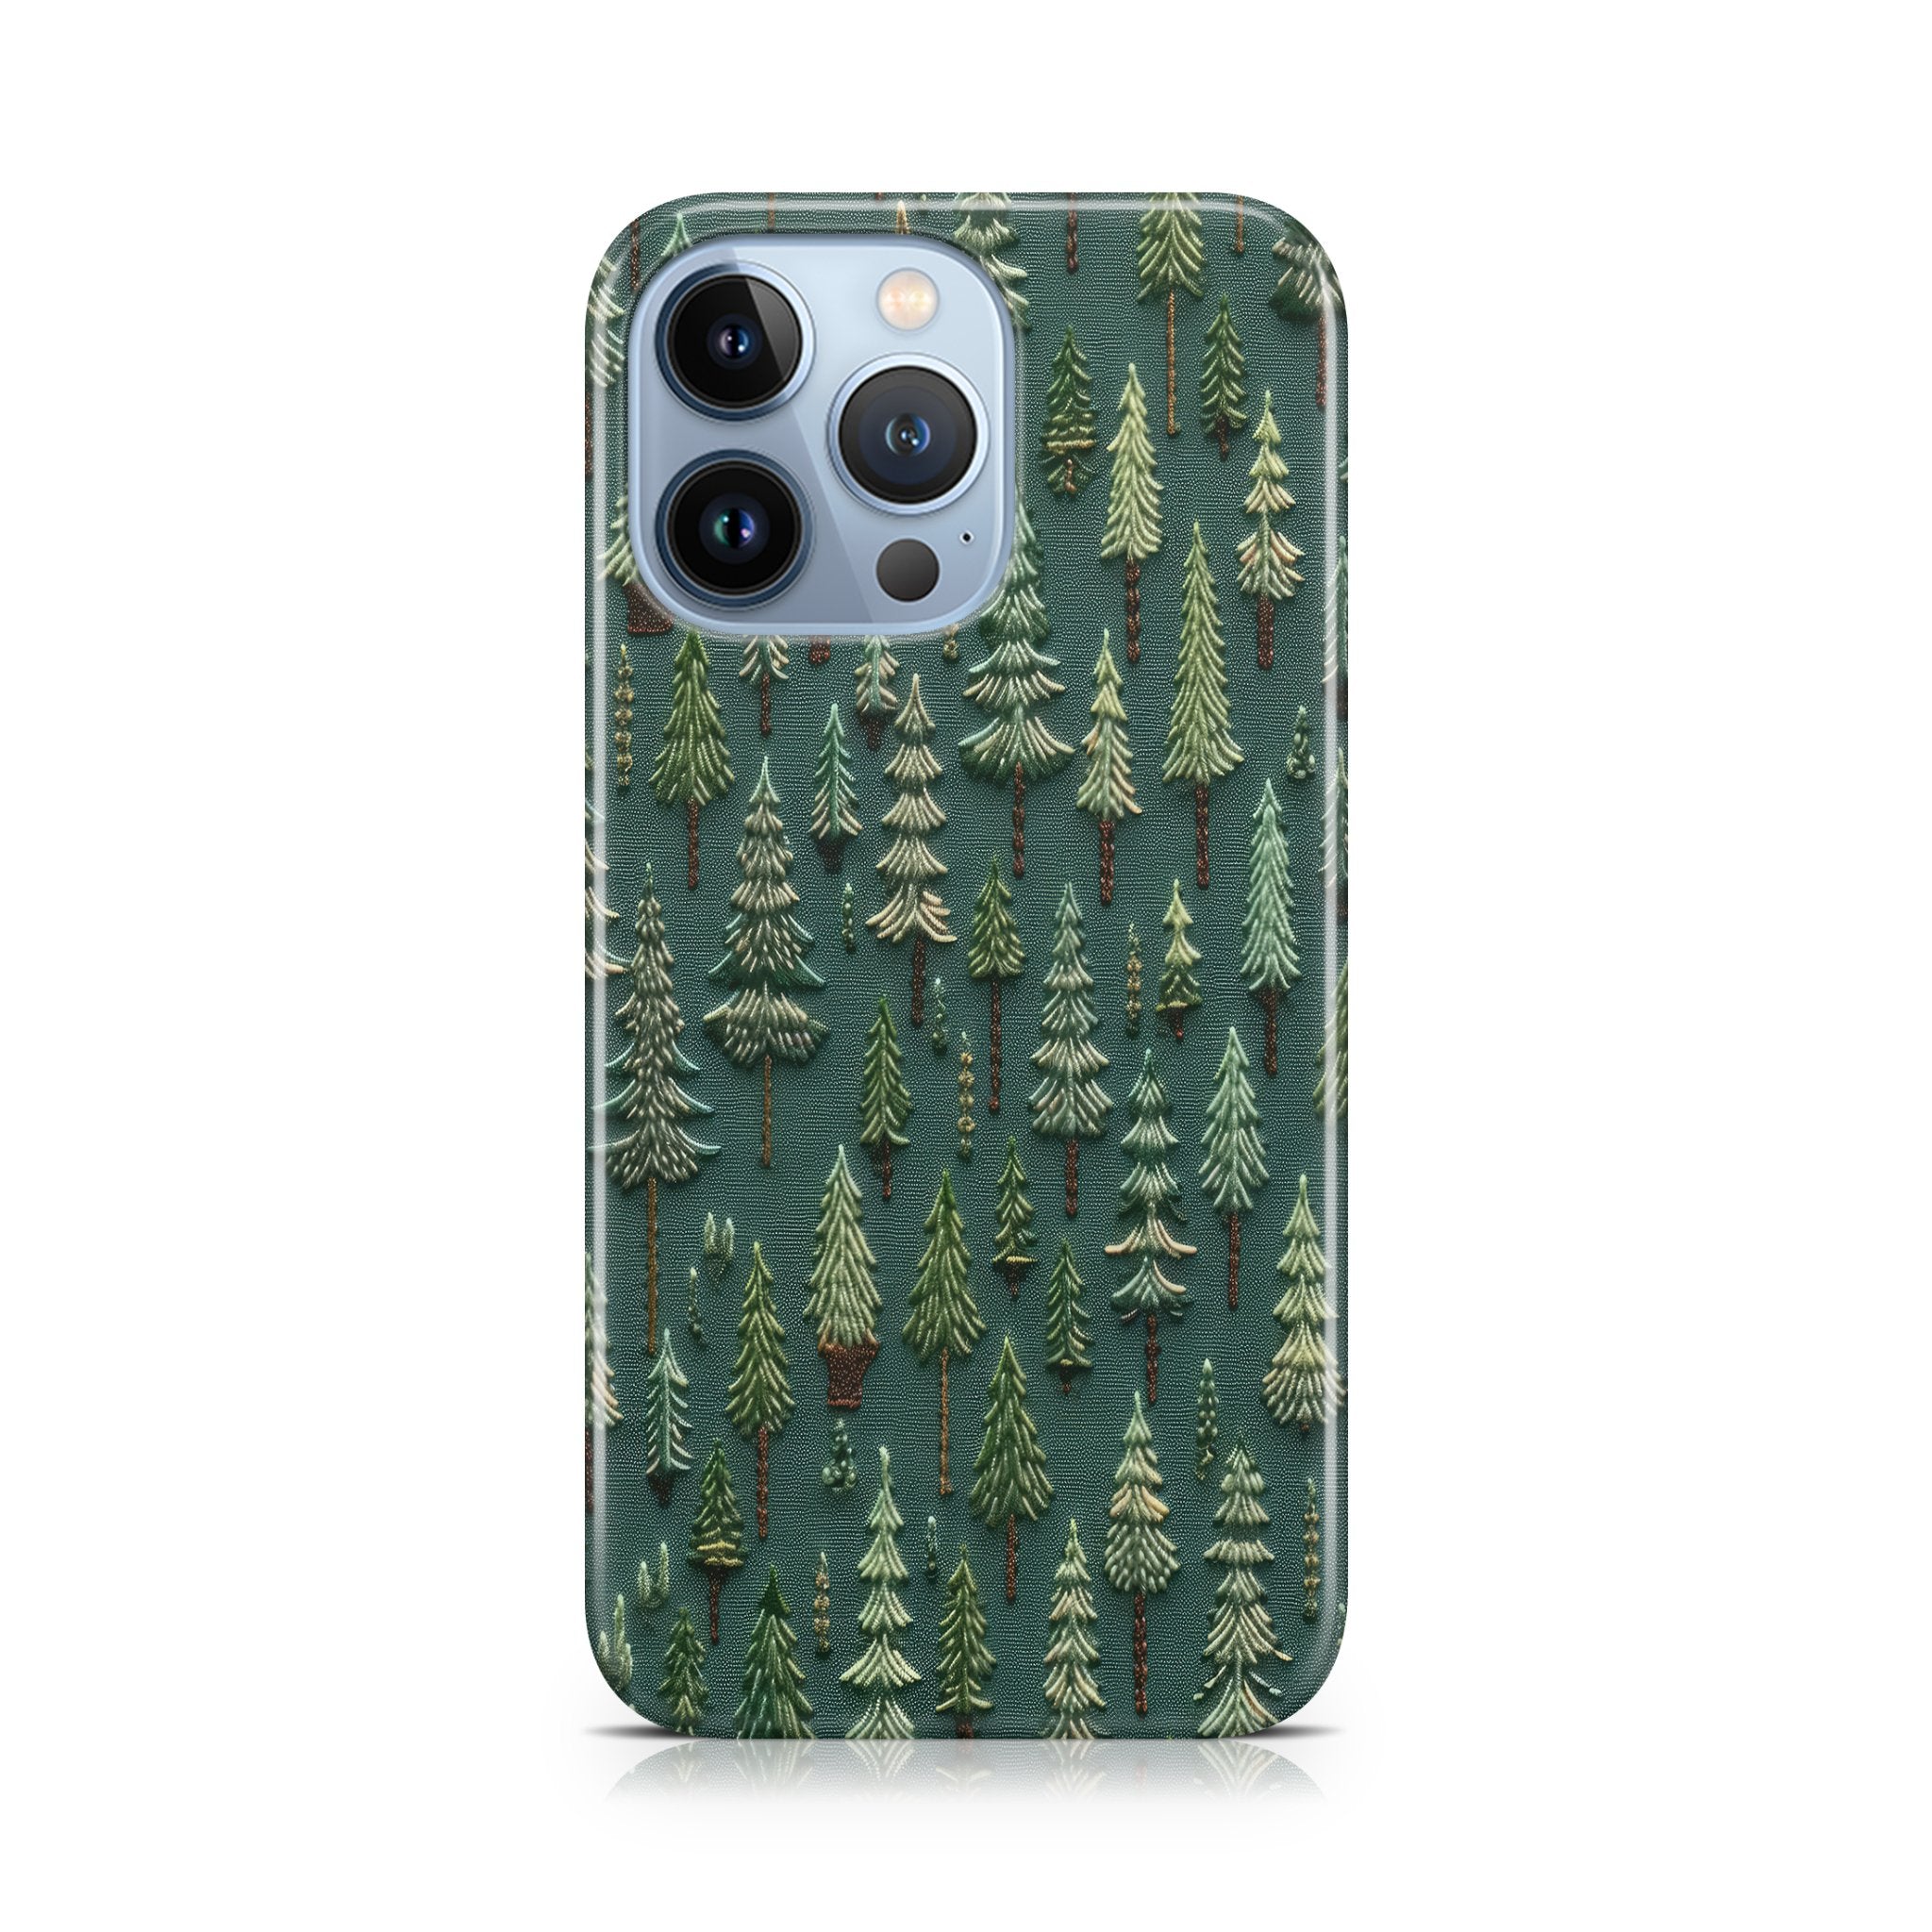 Embroidered Forest - iPhone phone case designs by CaseSwagger